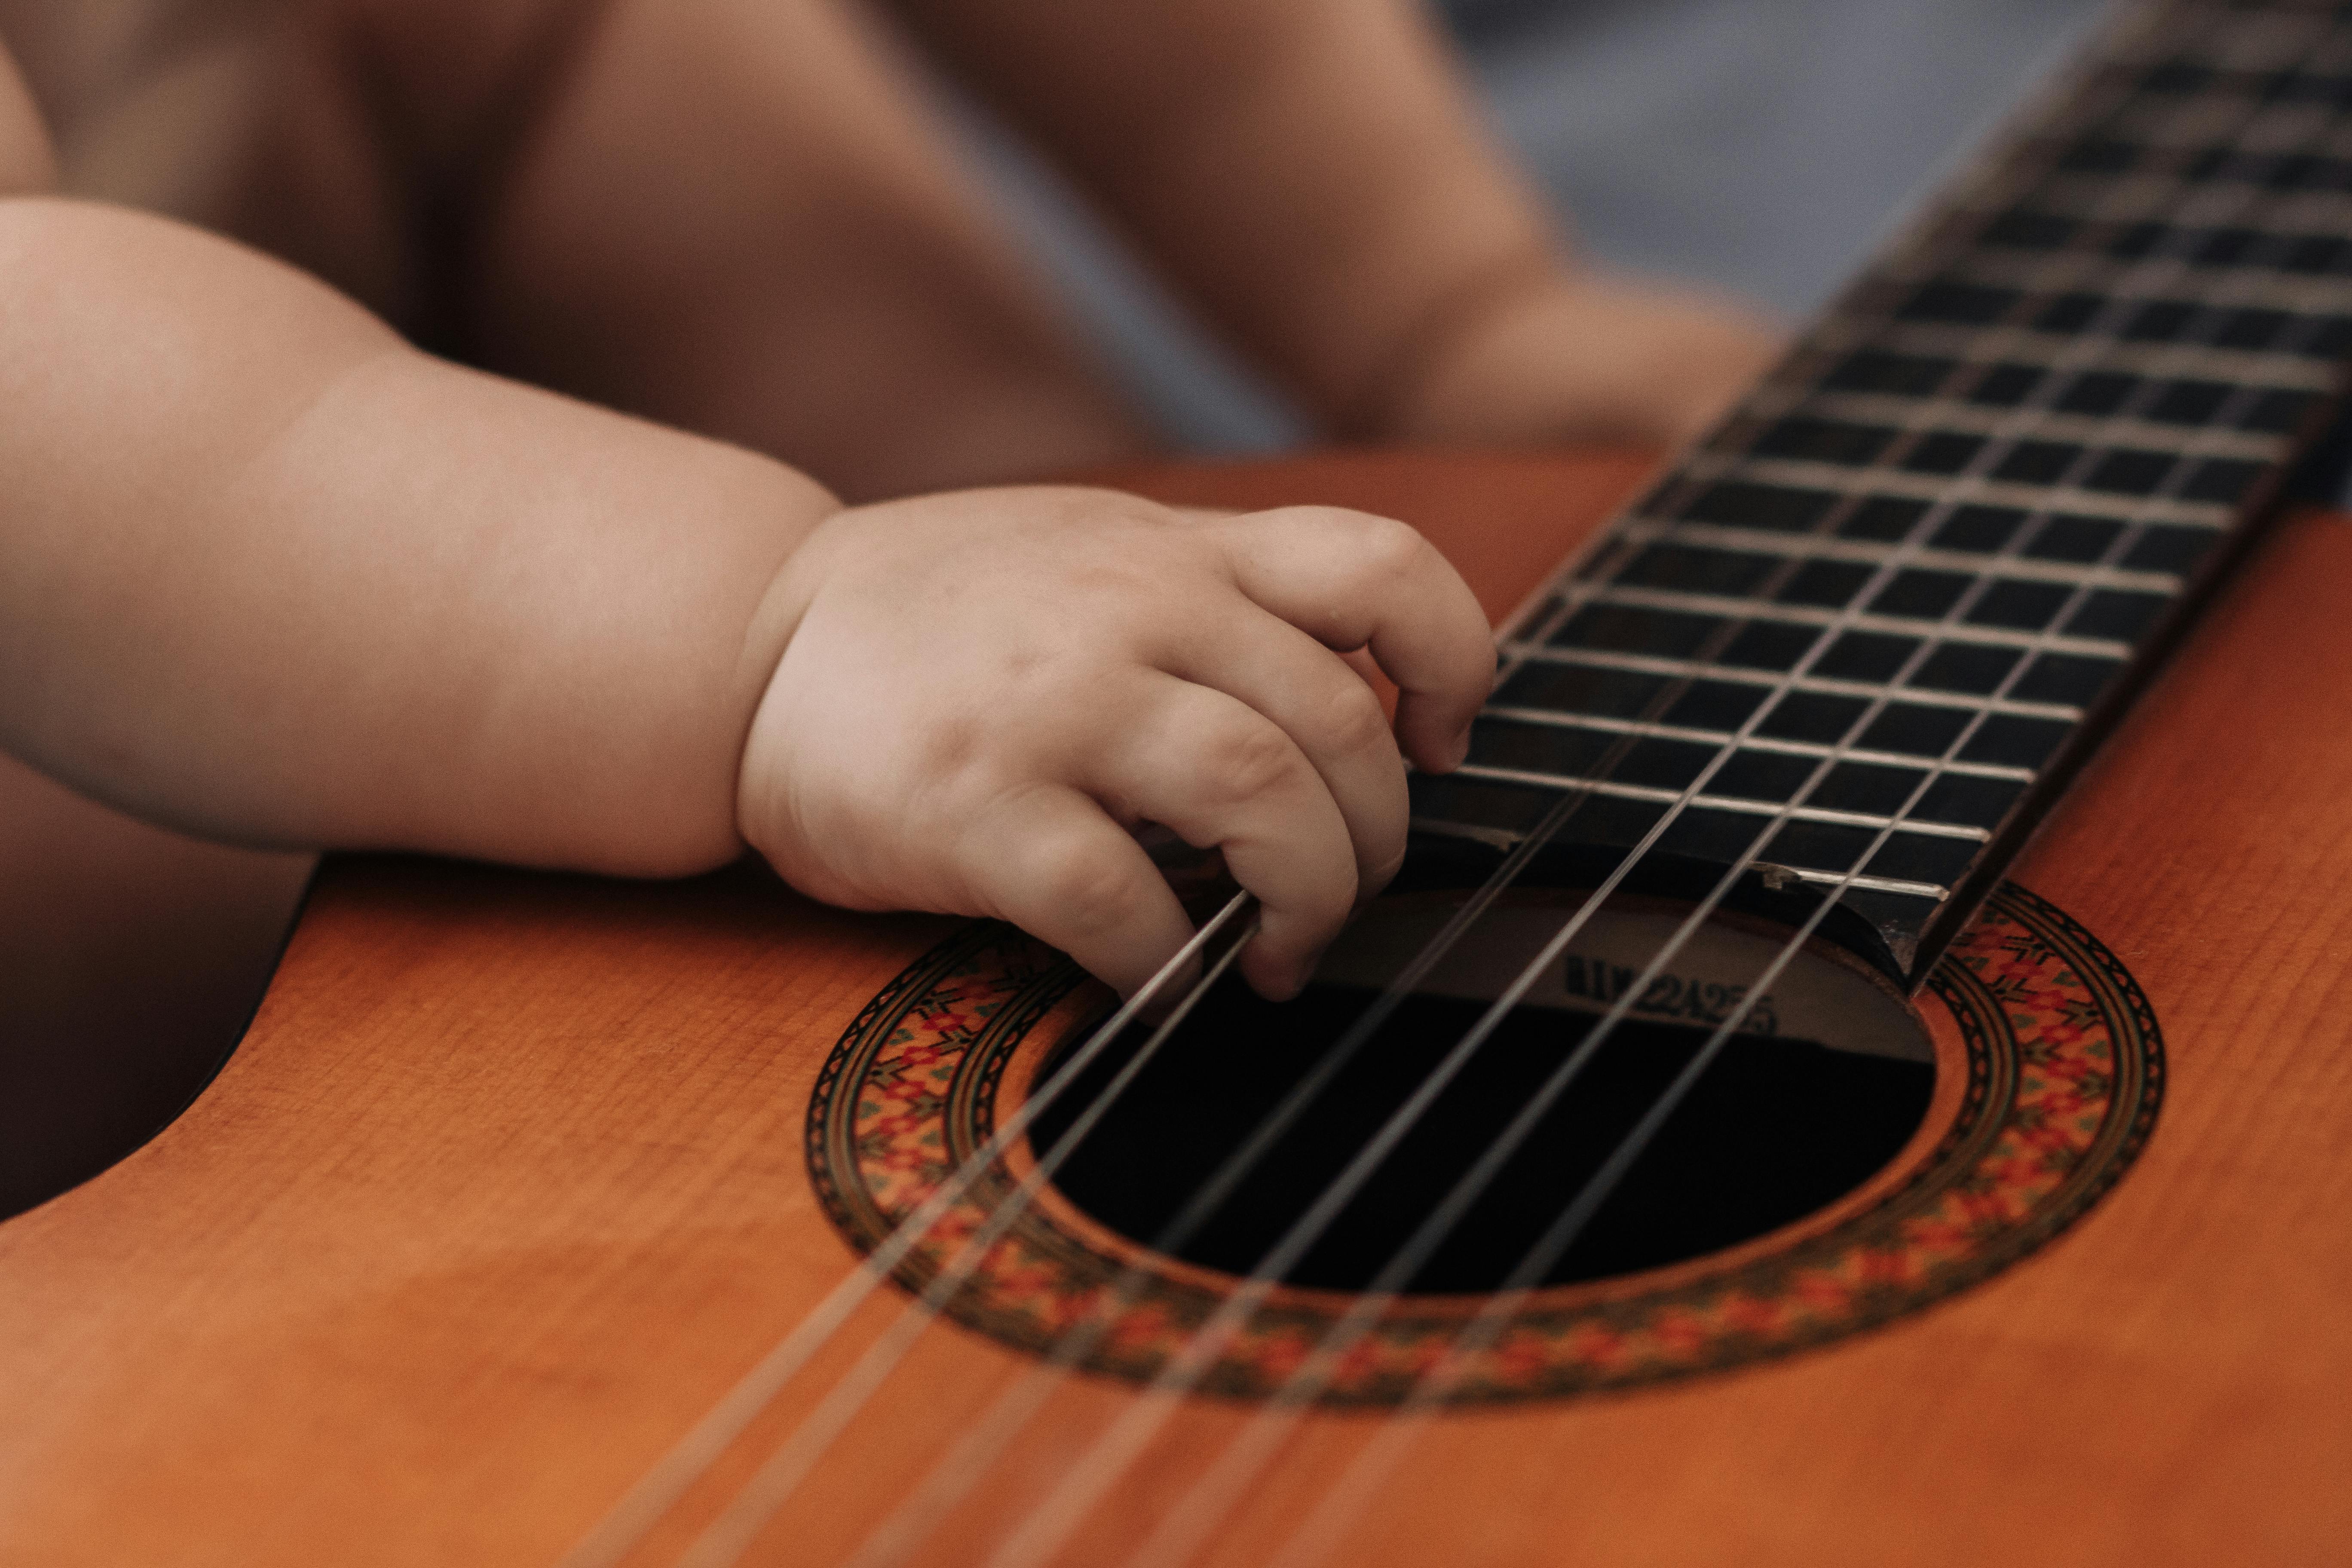 A baby's hand holding guitar strings | Source: Pexels